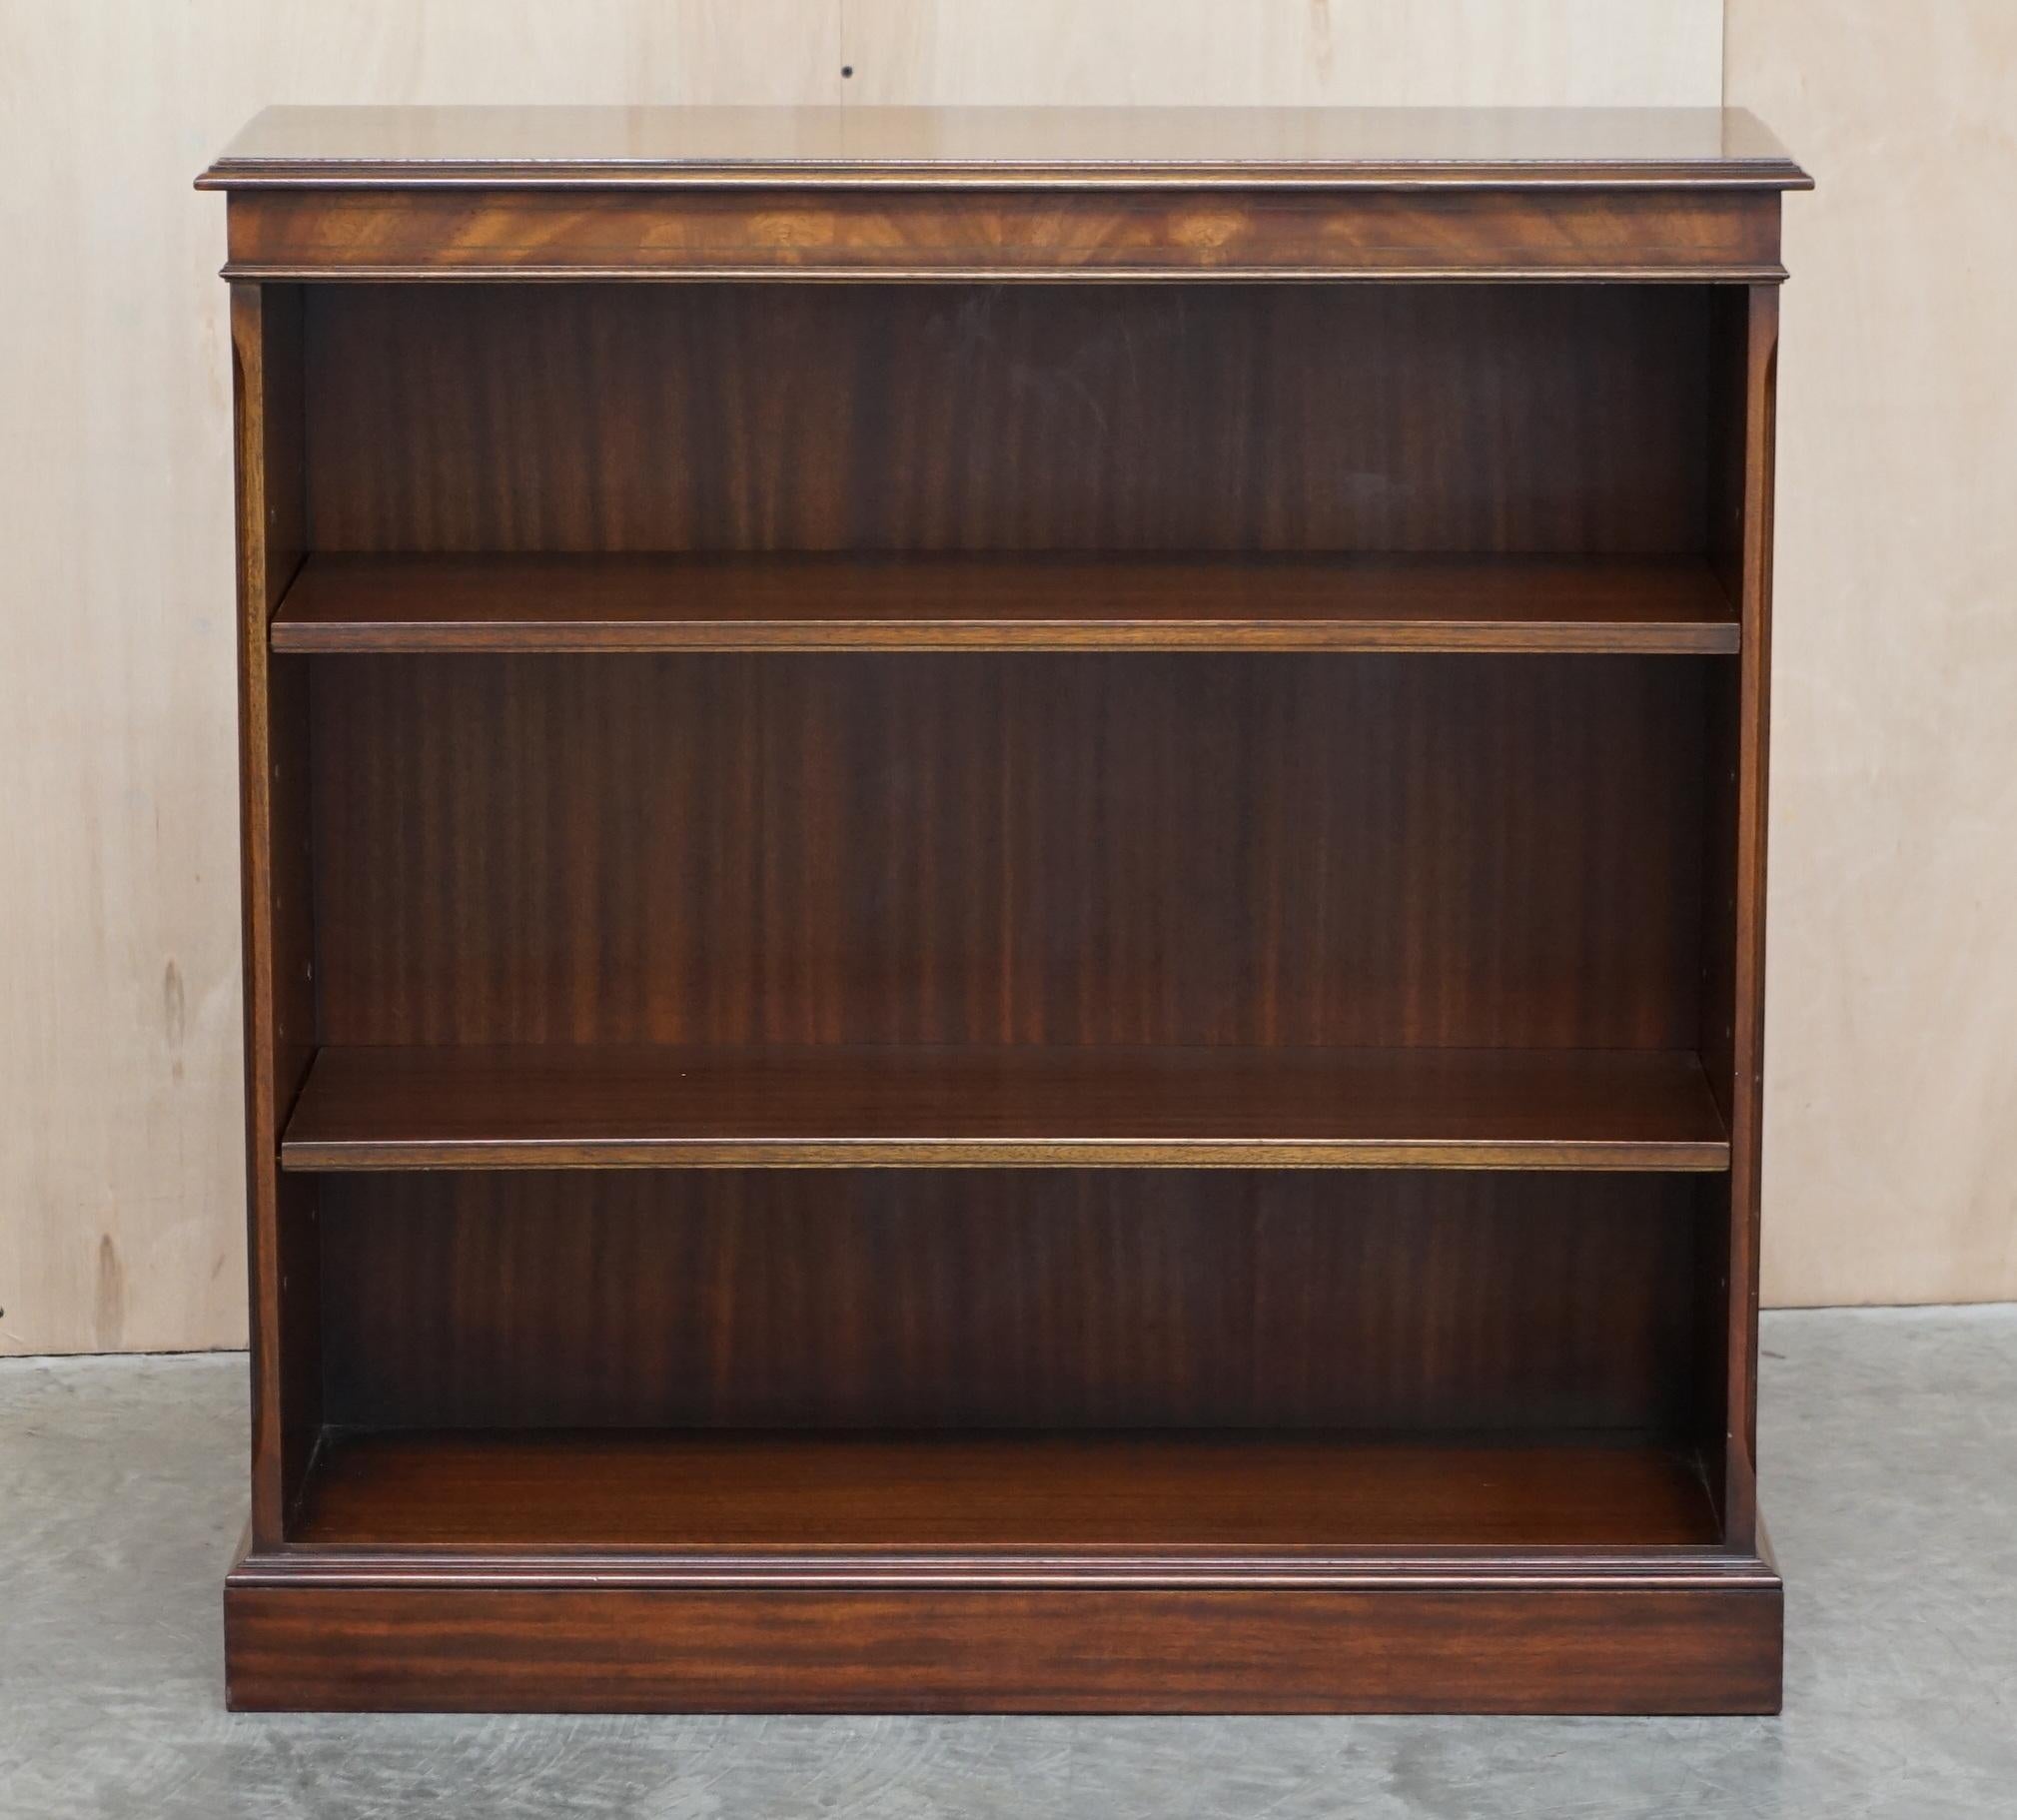 We are delighted to offer for sale this stunning vintage Bevan Funnell dwarf open library bookcase in flamed mahogany

It is a good looking and well made piece, it has a luxury flamed mahogany veneer over a hard wood frame, the shelves are